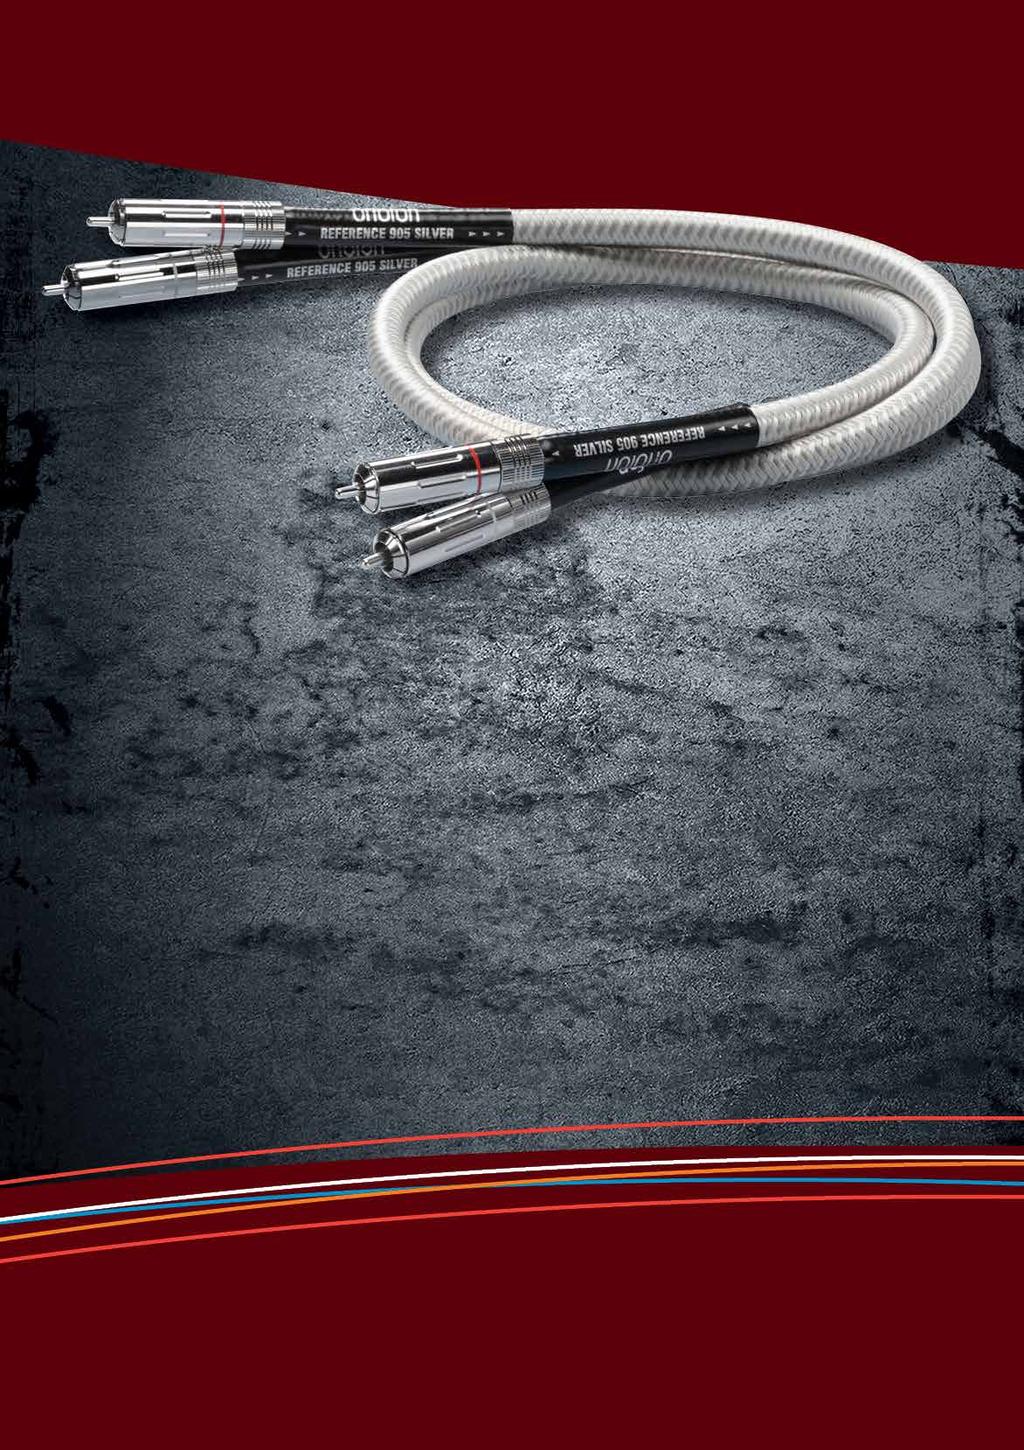 Get more information about Ortofon cables on our website.